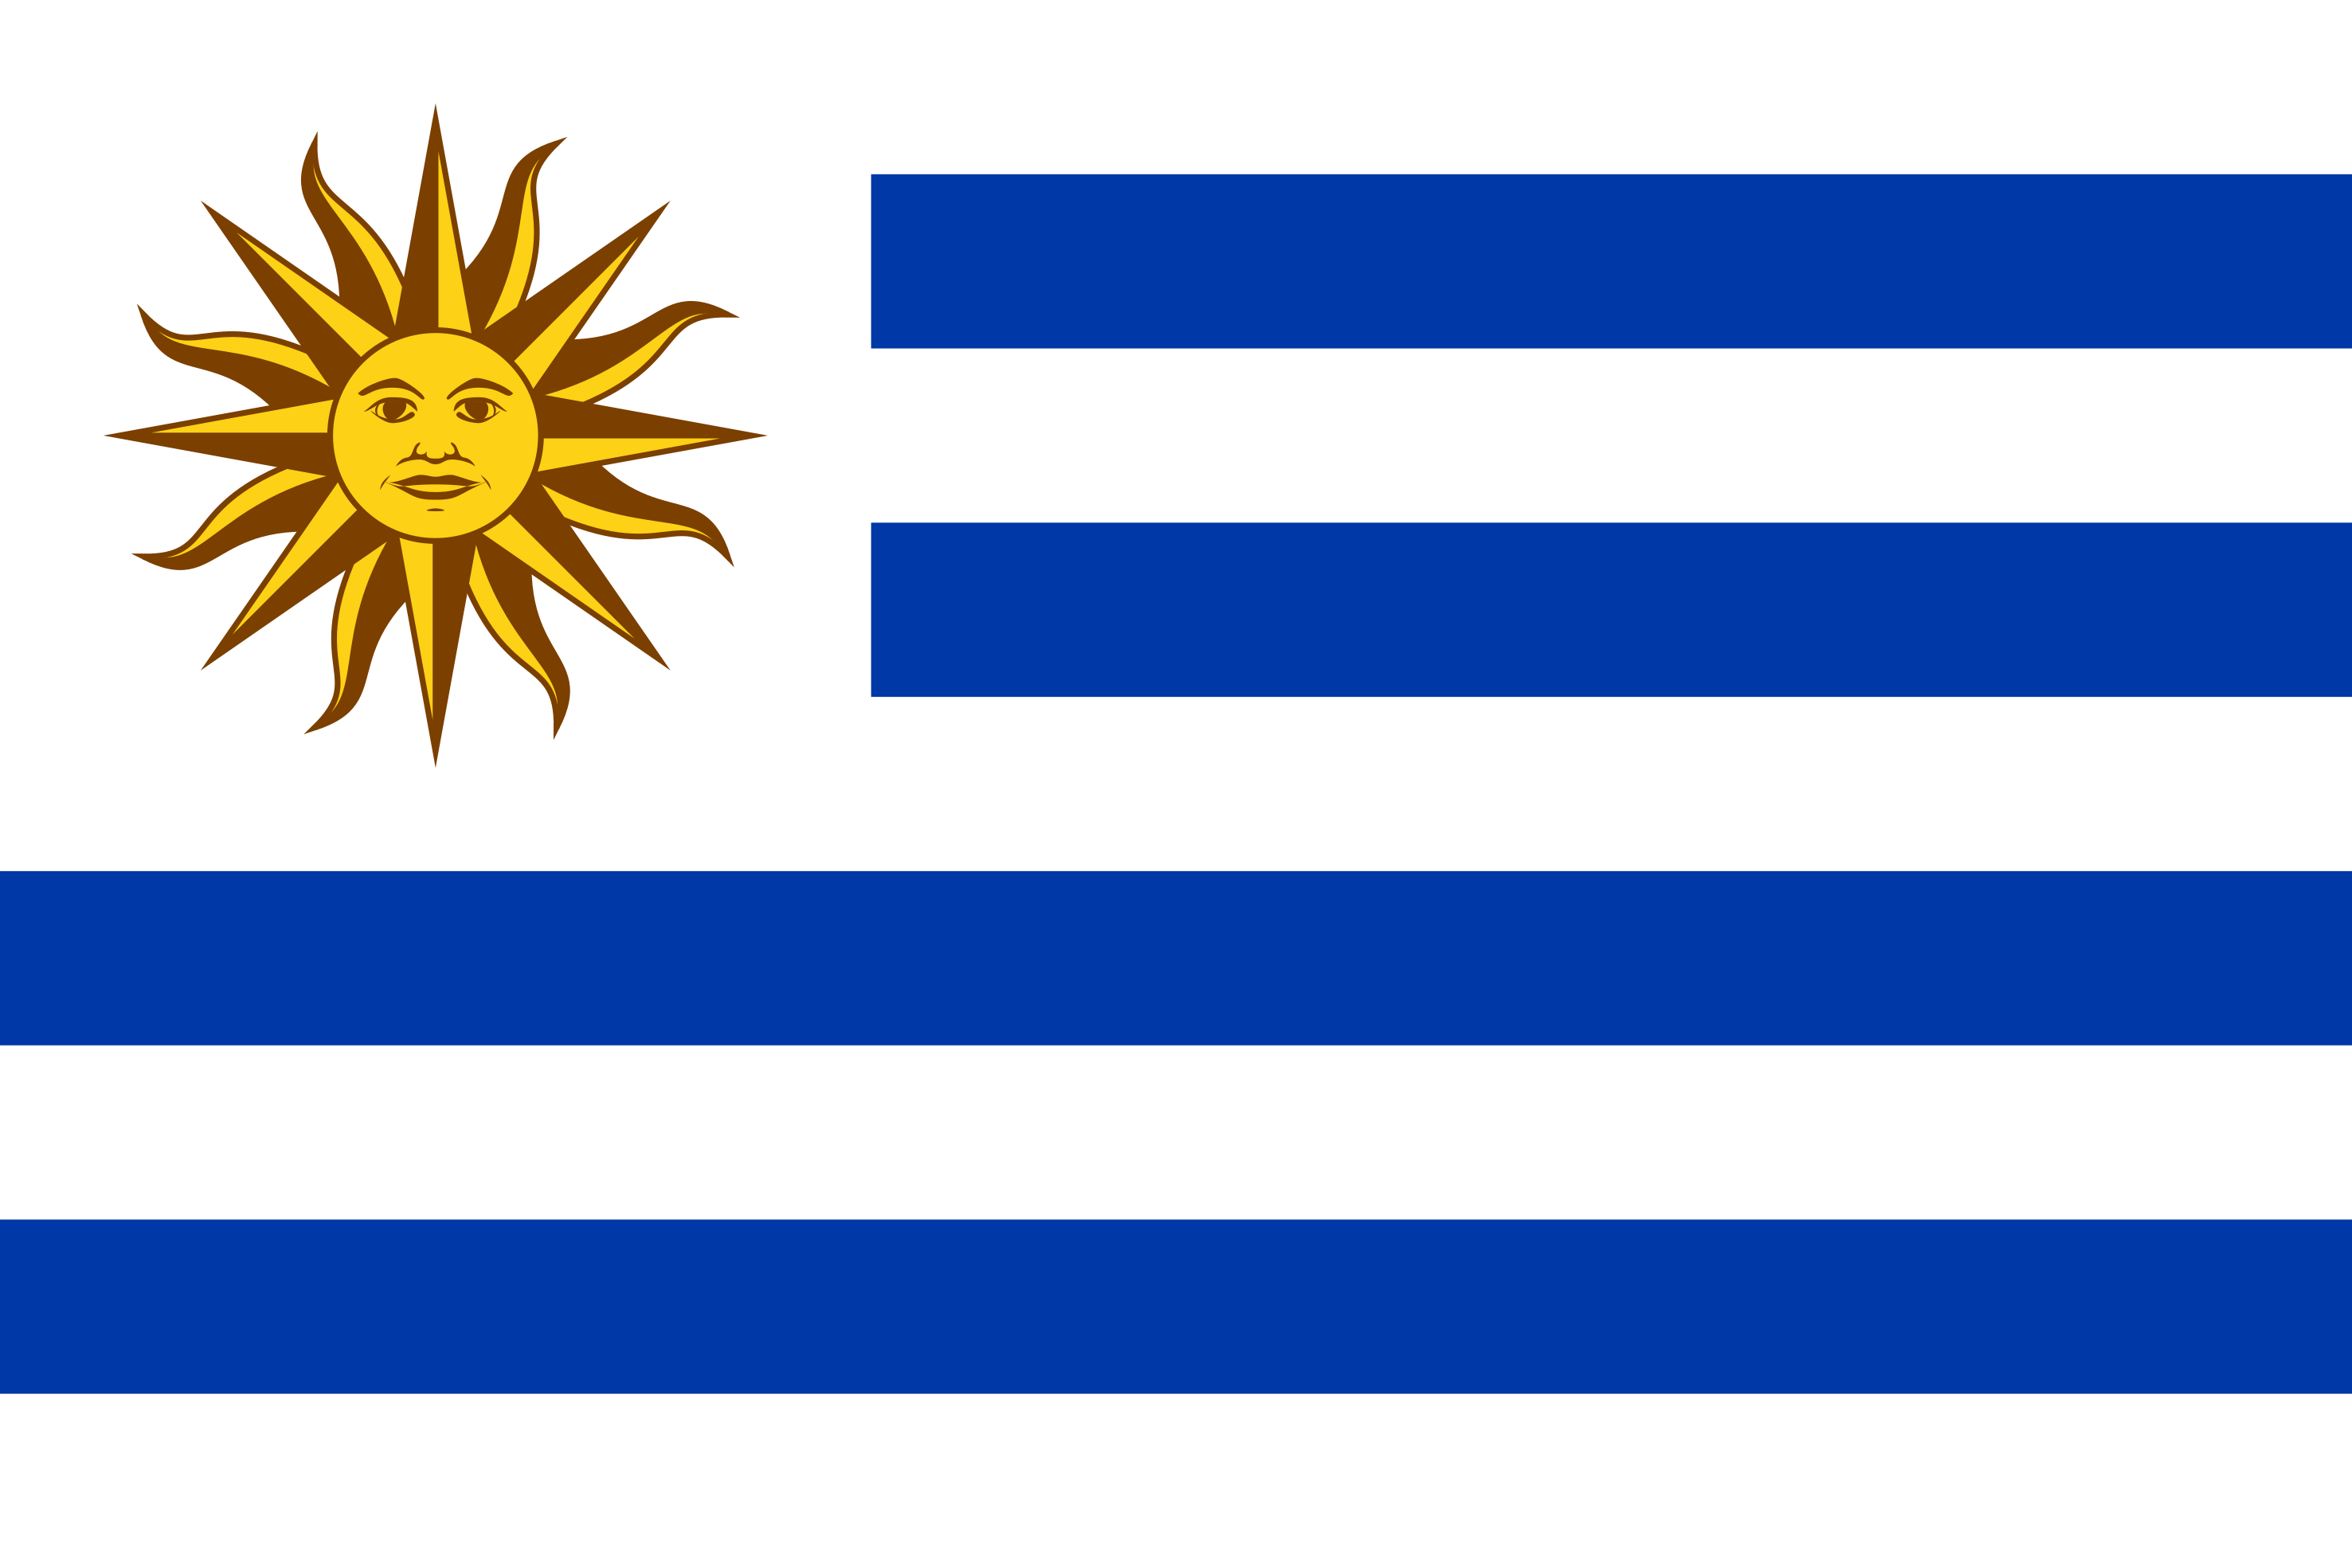 The Uruguay Flag Image - Free Download